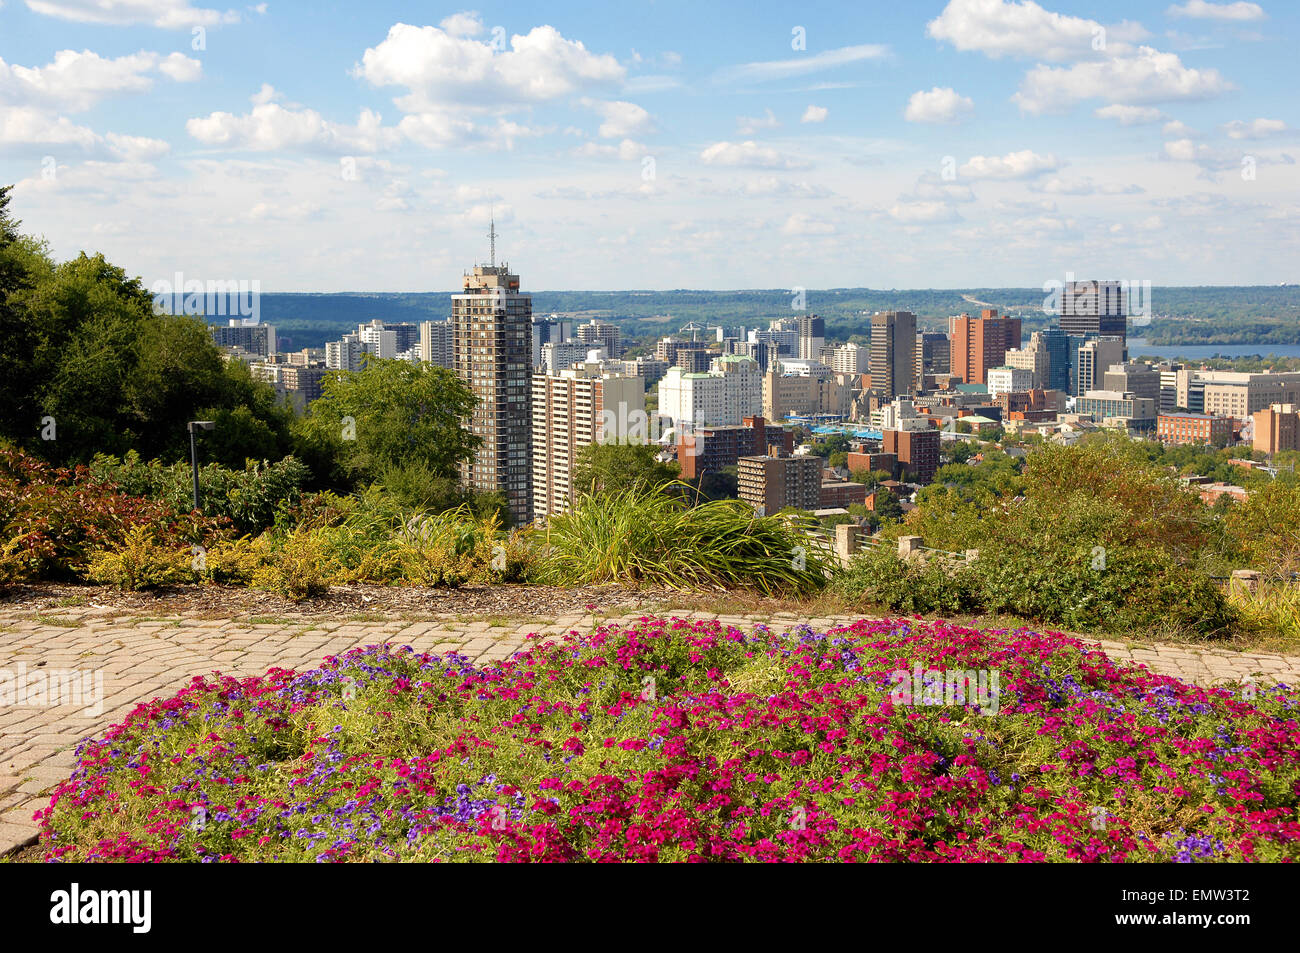 A high view from the mountain of downtown Hamilton, Canada with a park in the foreground. Stock Photo